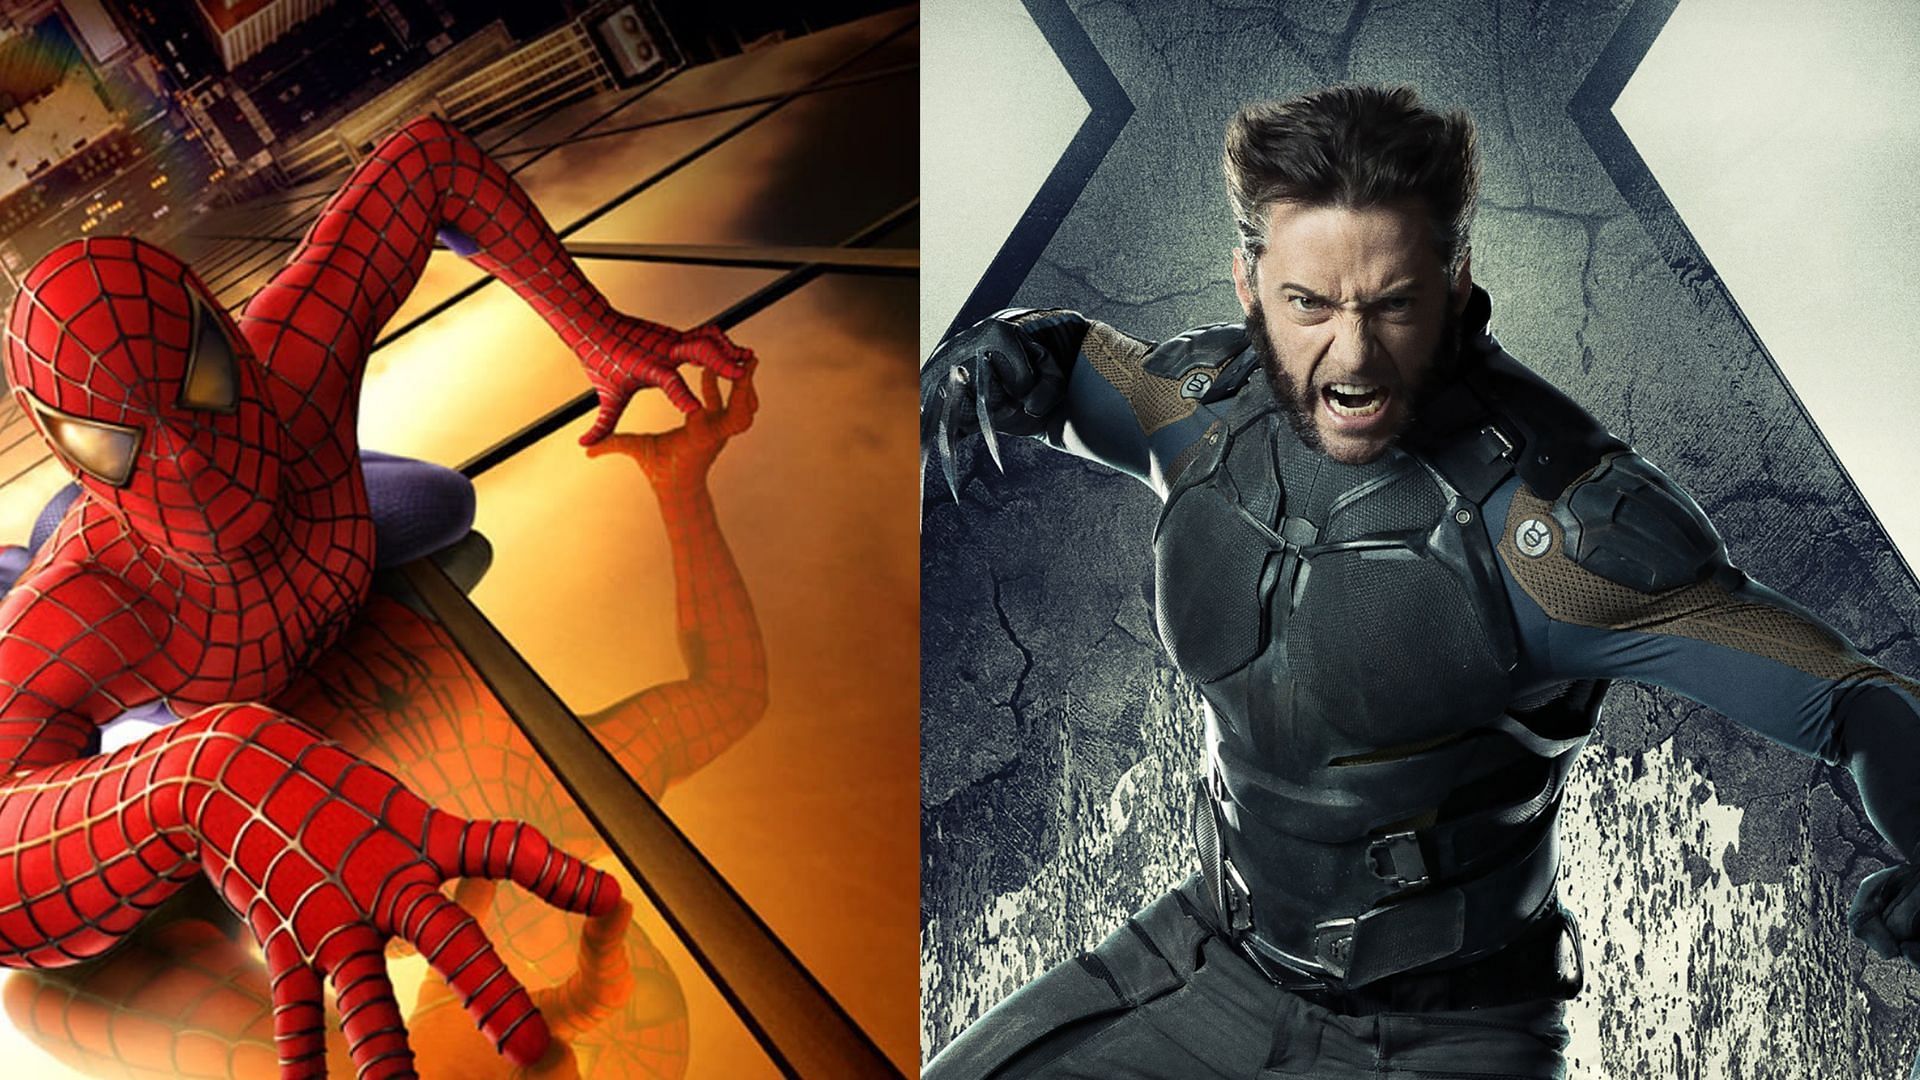 Spider-Man and Wolverine (images via Marvel/Sony/20th Century Fox)